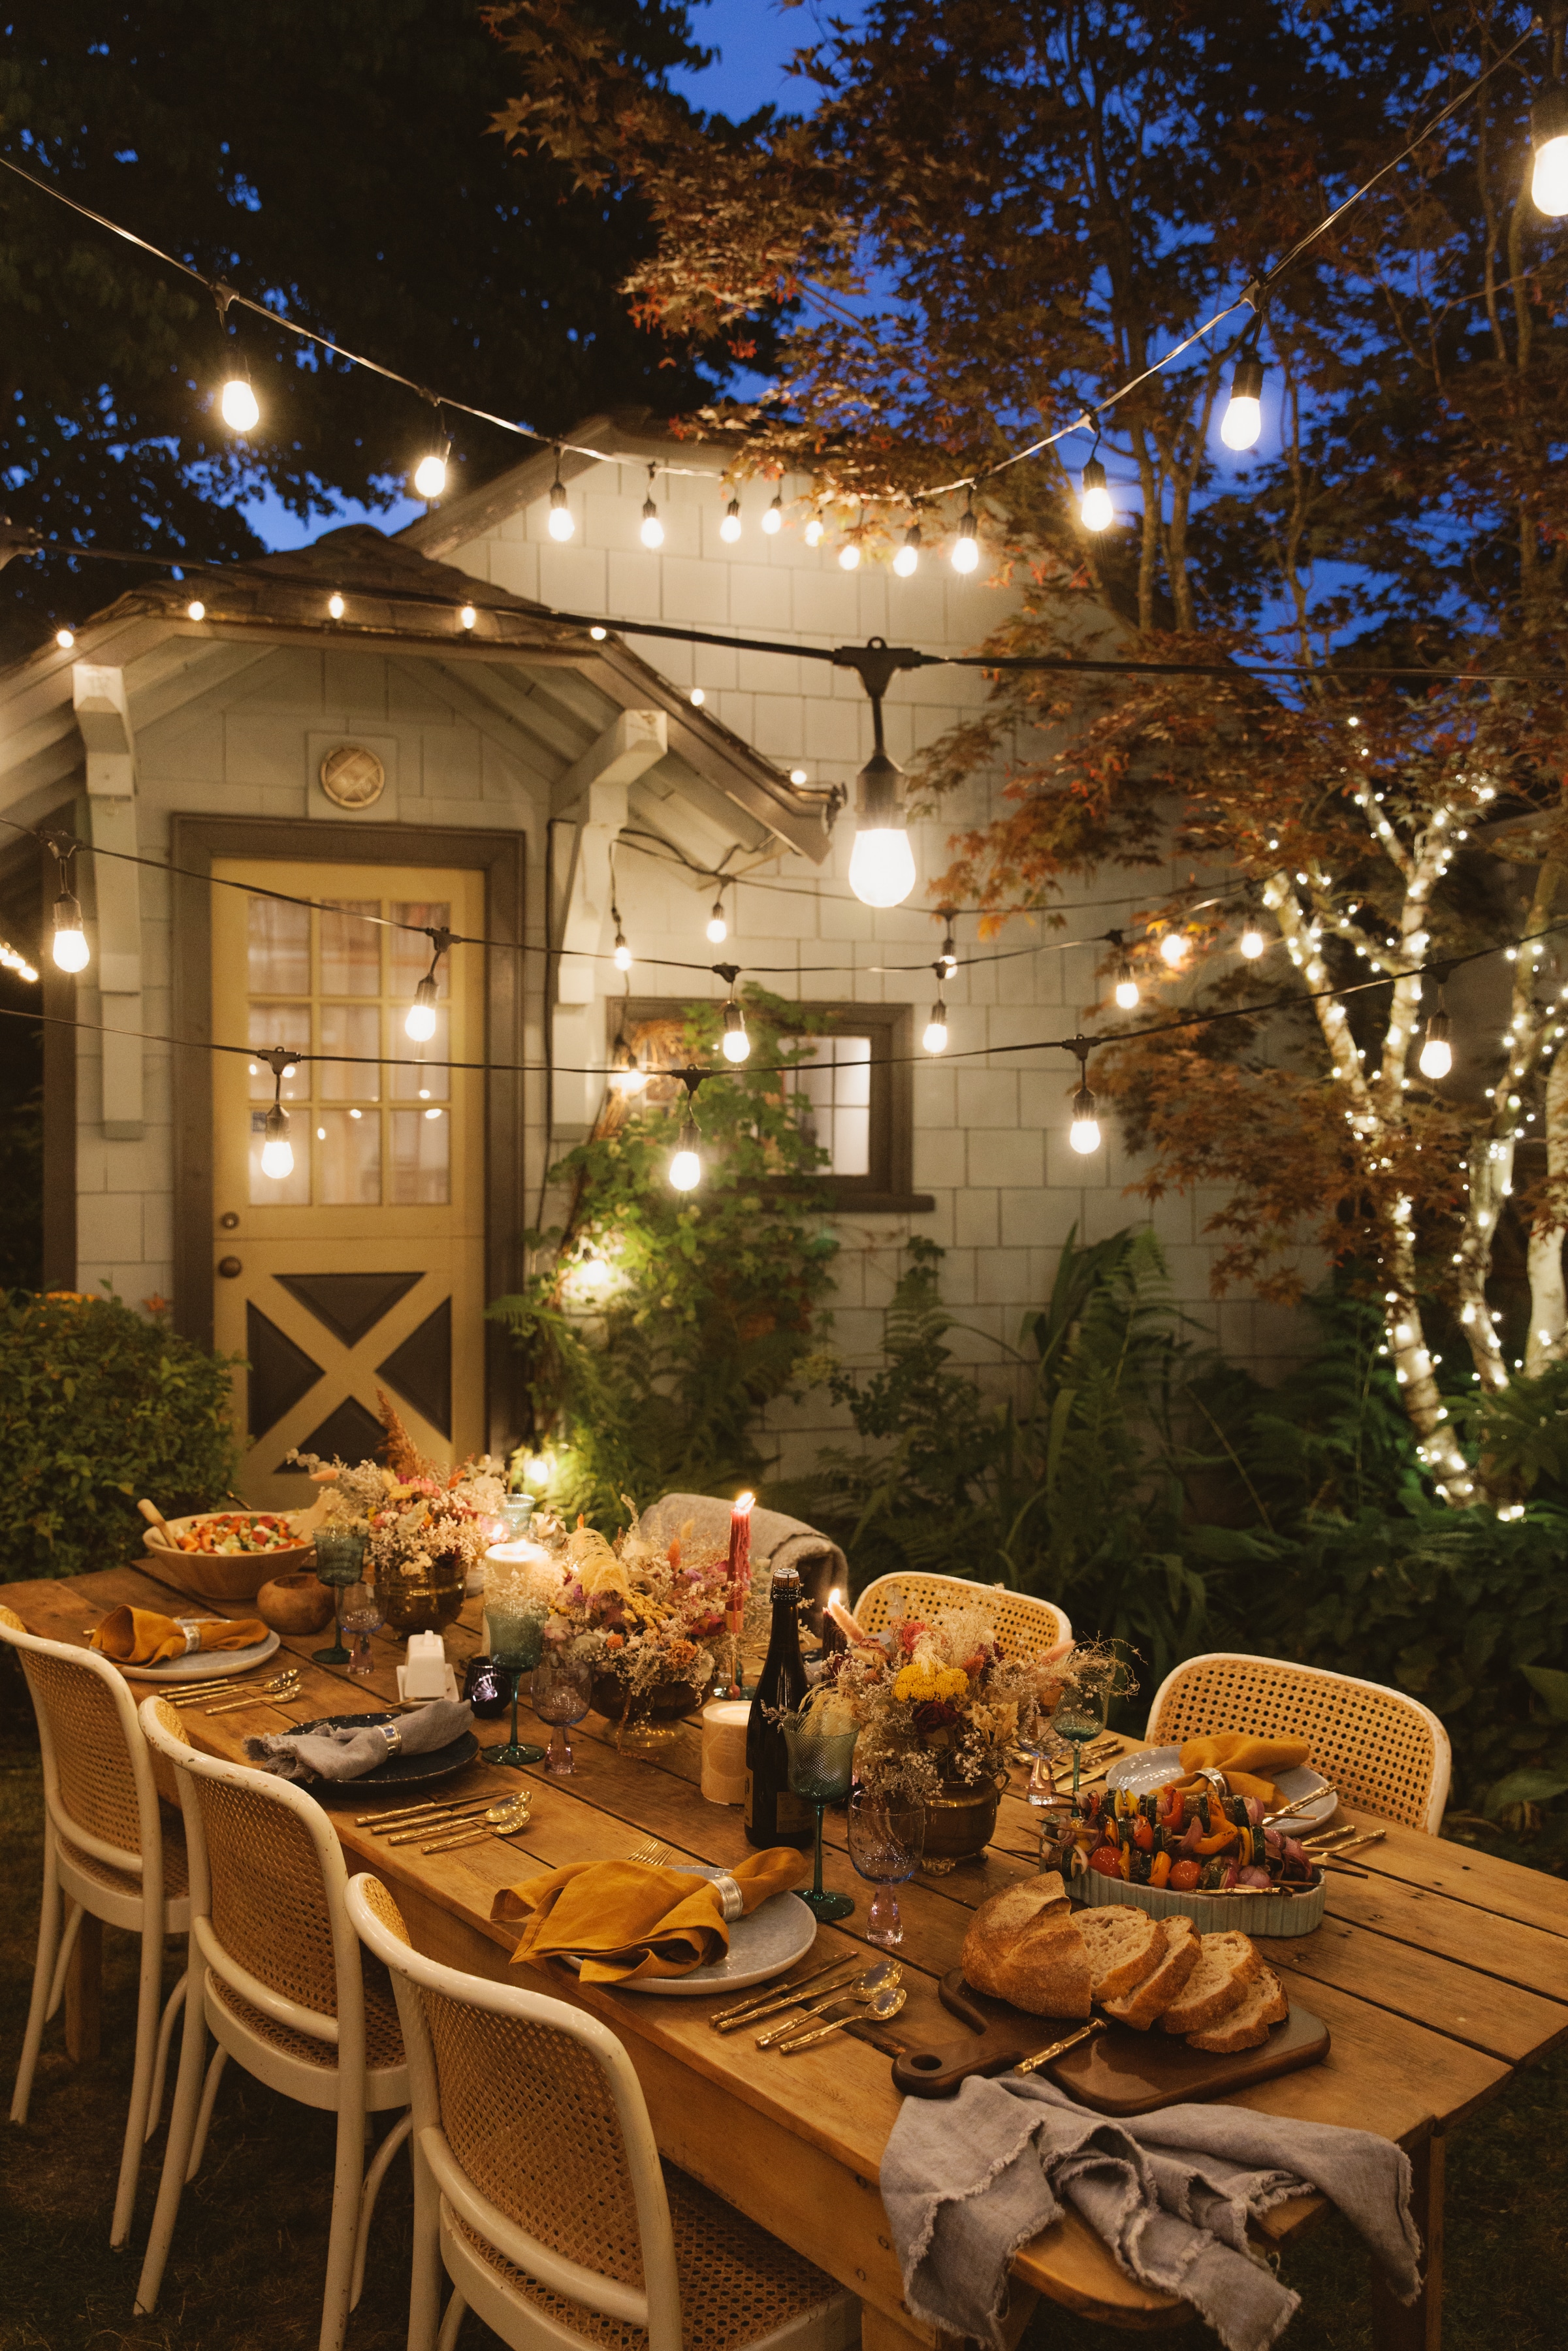 Patio lighting above table with place settings and candles